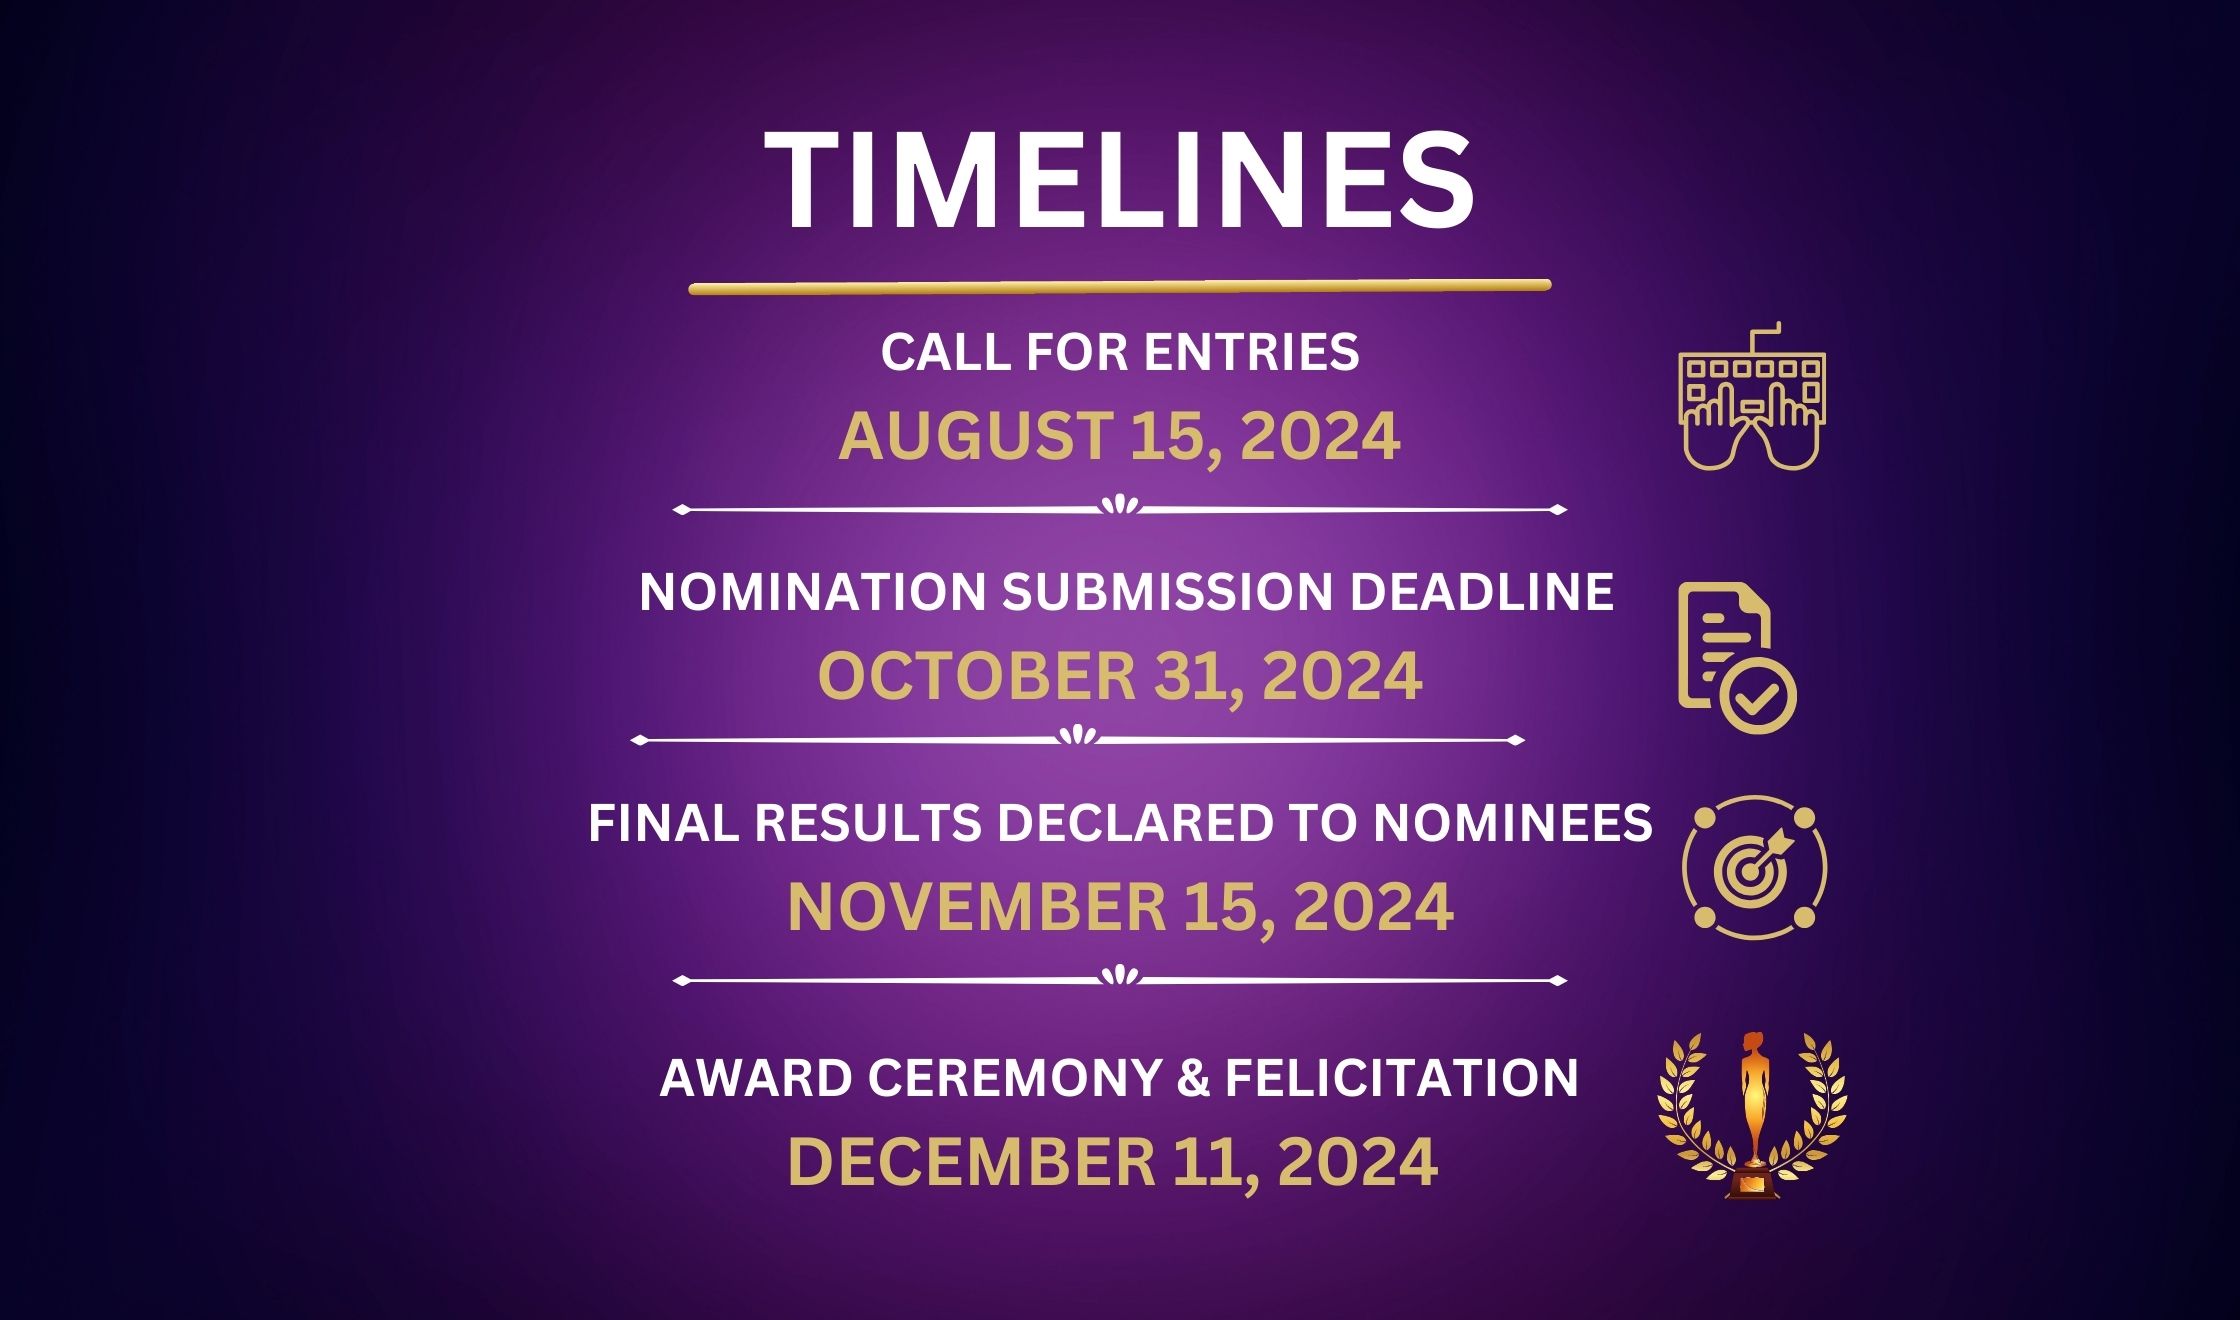 GWHIC AWARDS DEADLINES